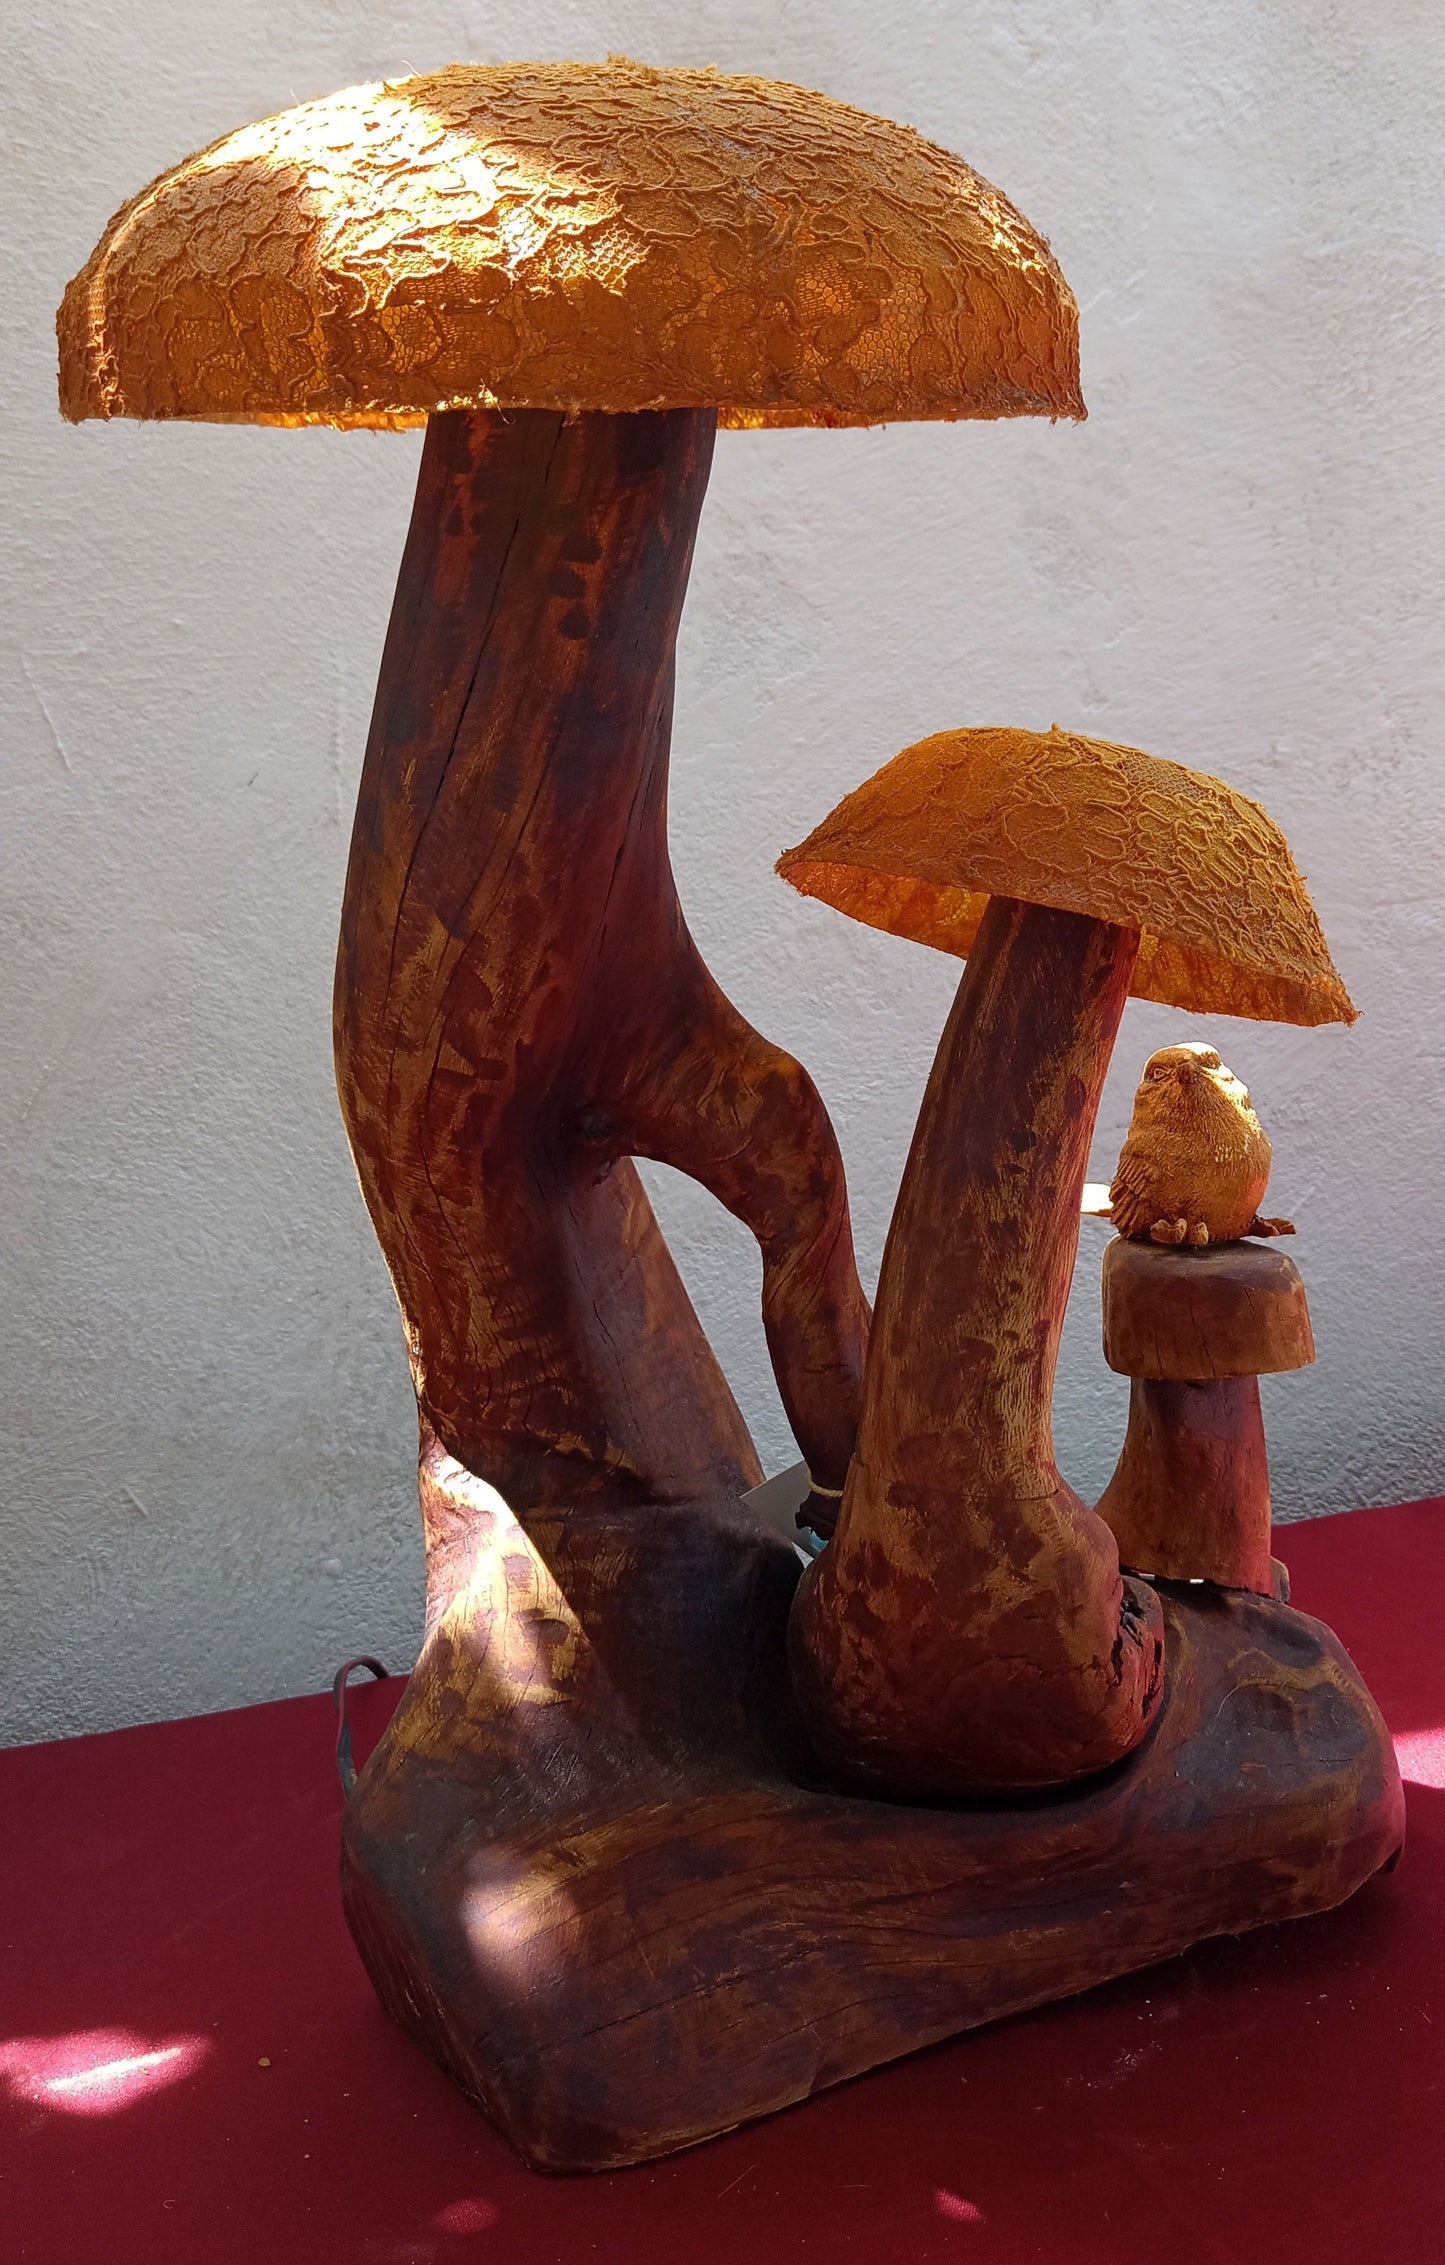 Driftwood Office Lamp - Mushrooms Style - Side view - kmnk deco